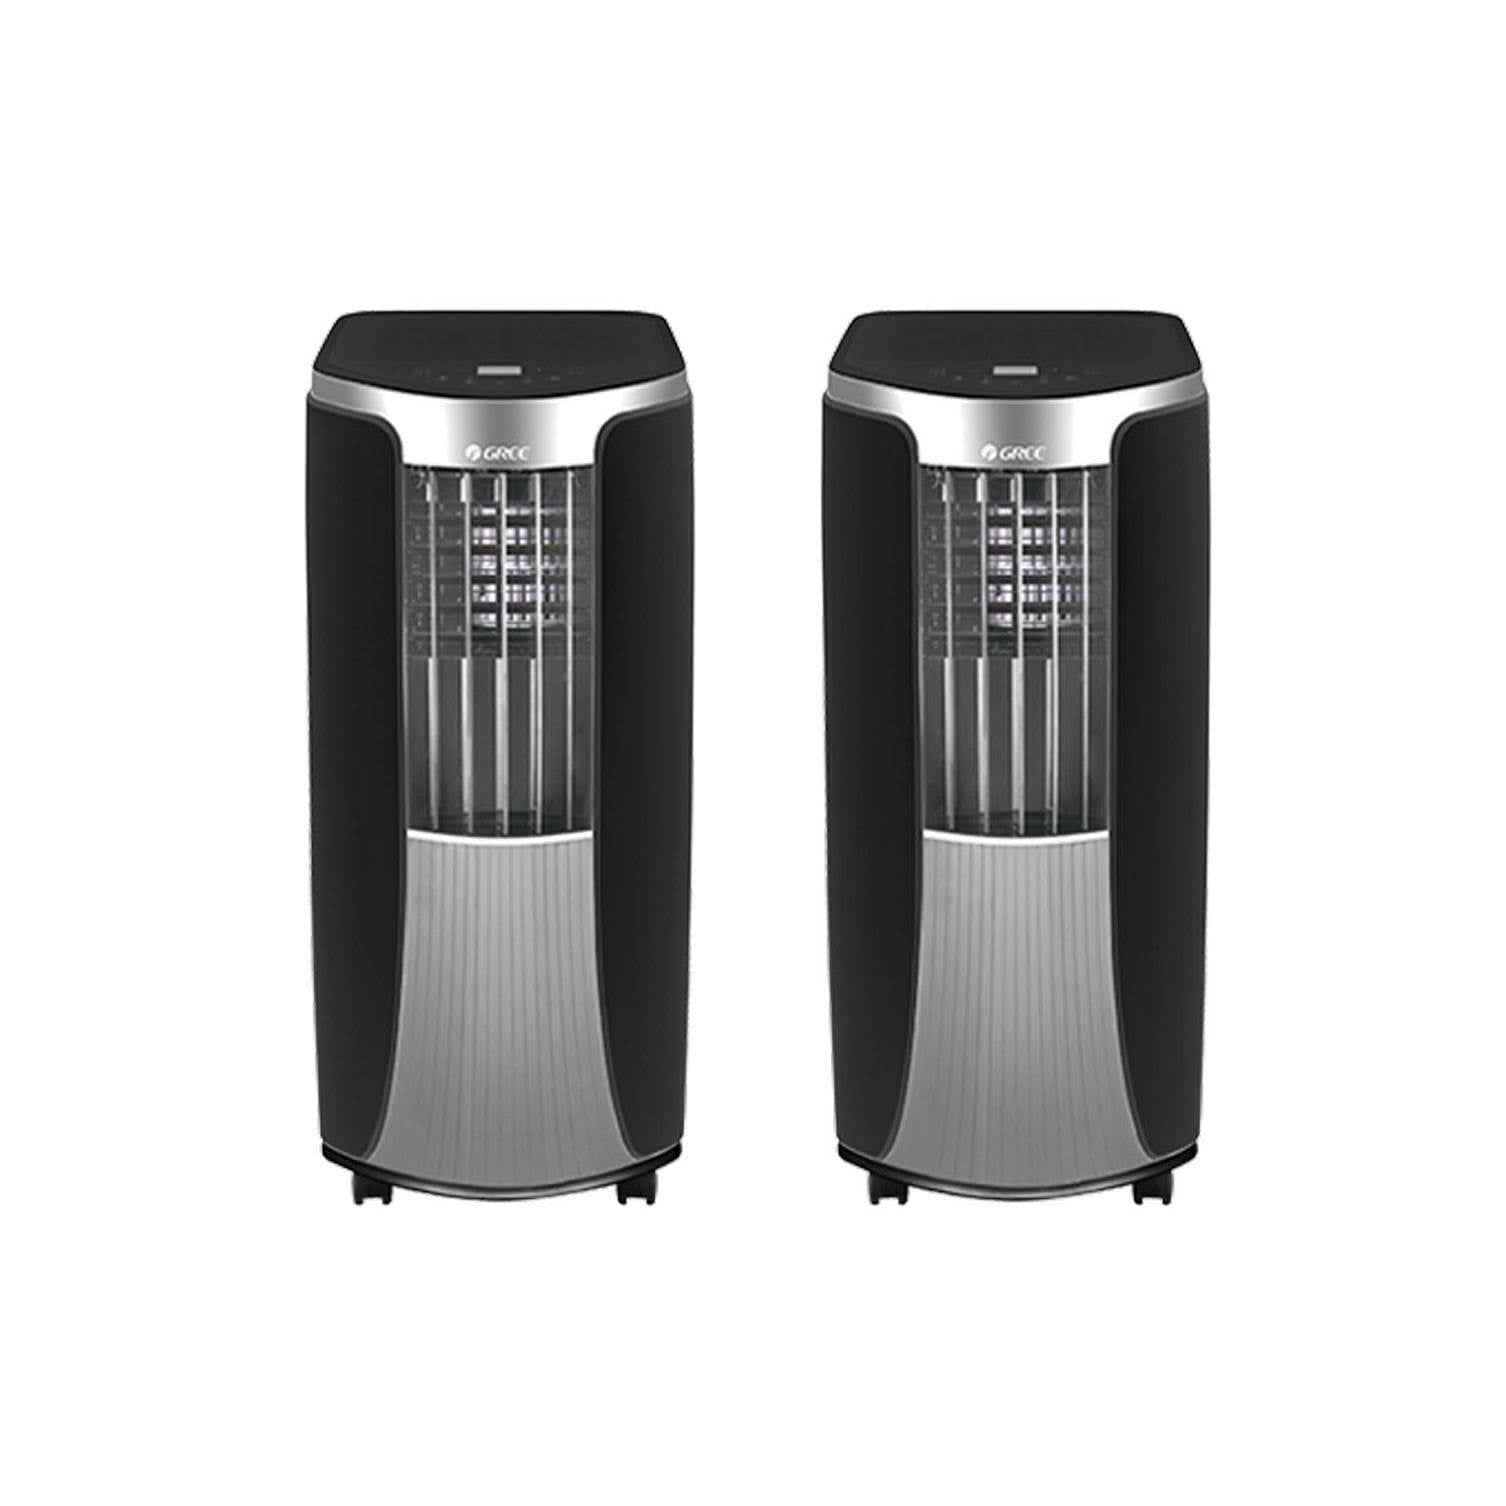 Gree 12000 BTU Air Conditioner with Remote (2 Pack) (Certified